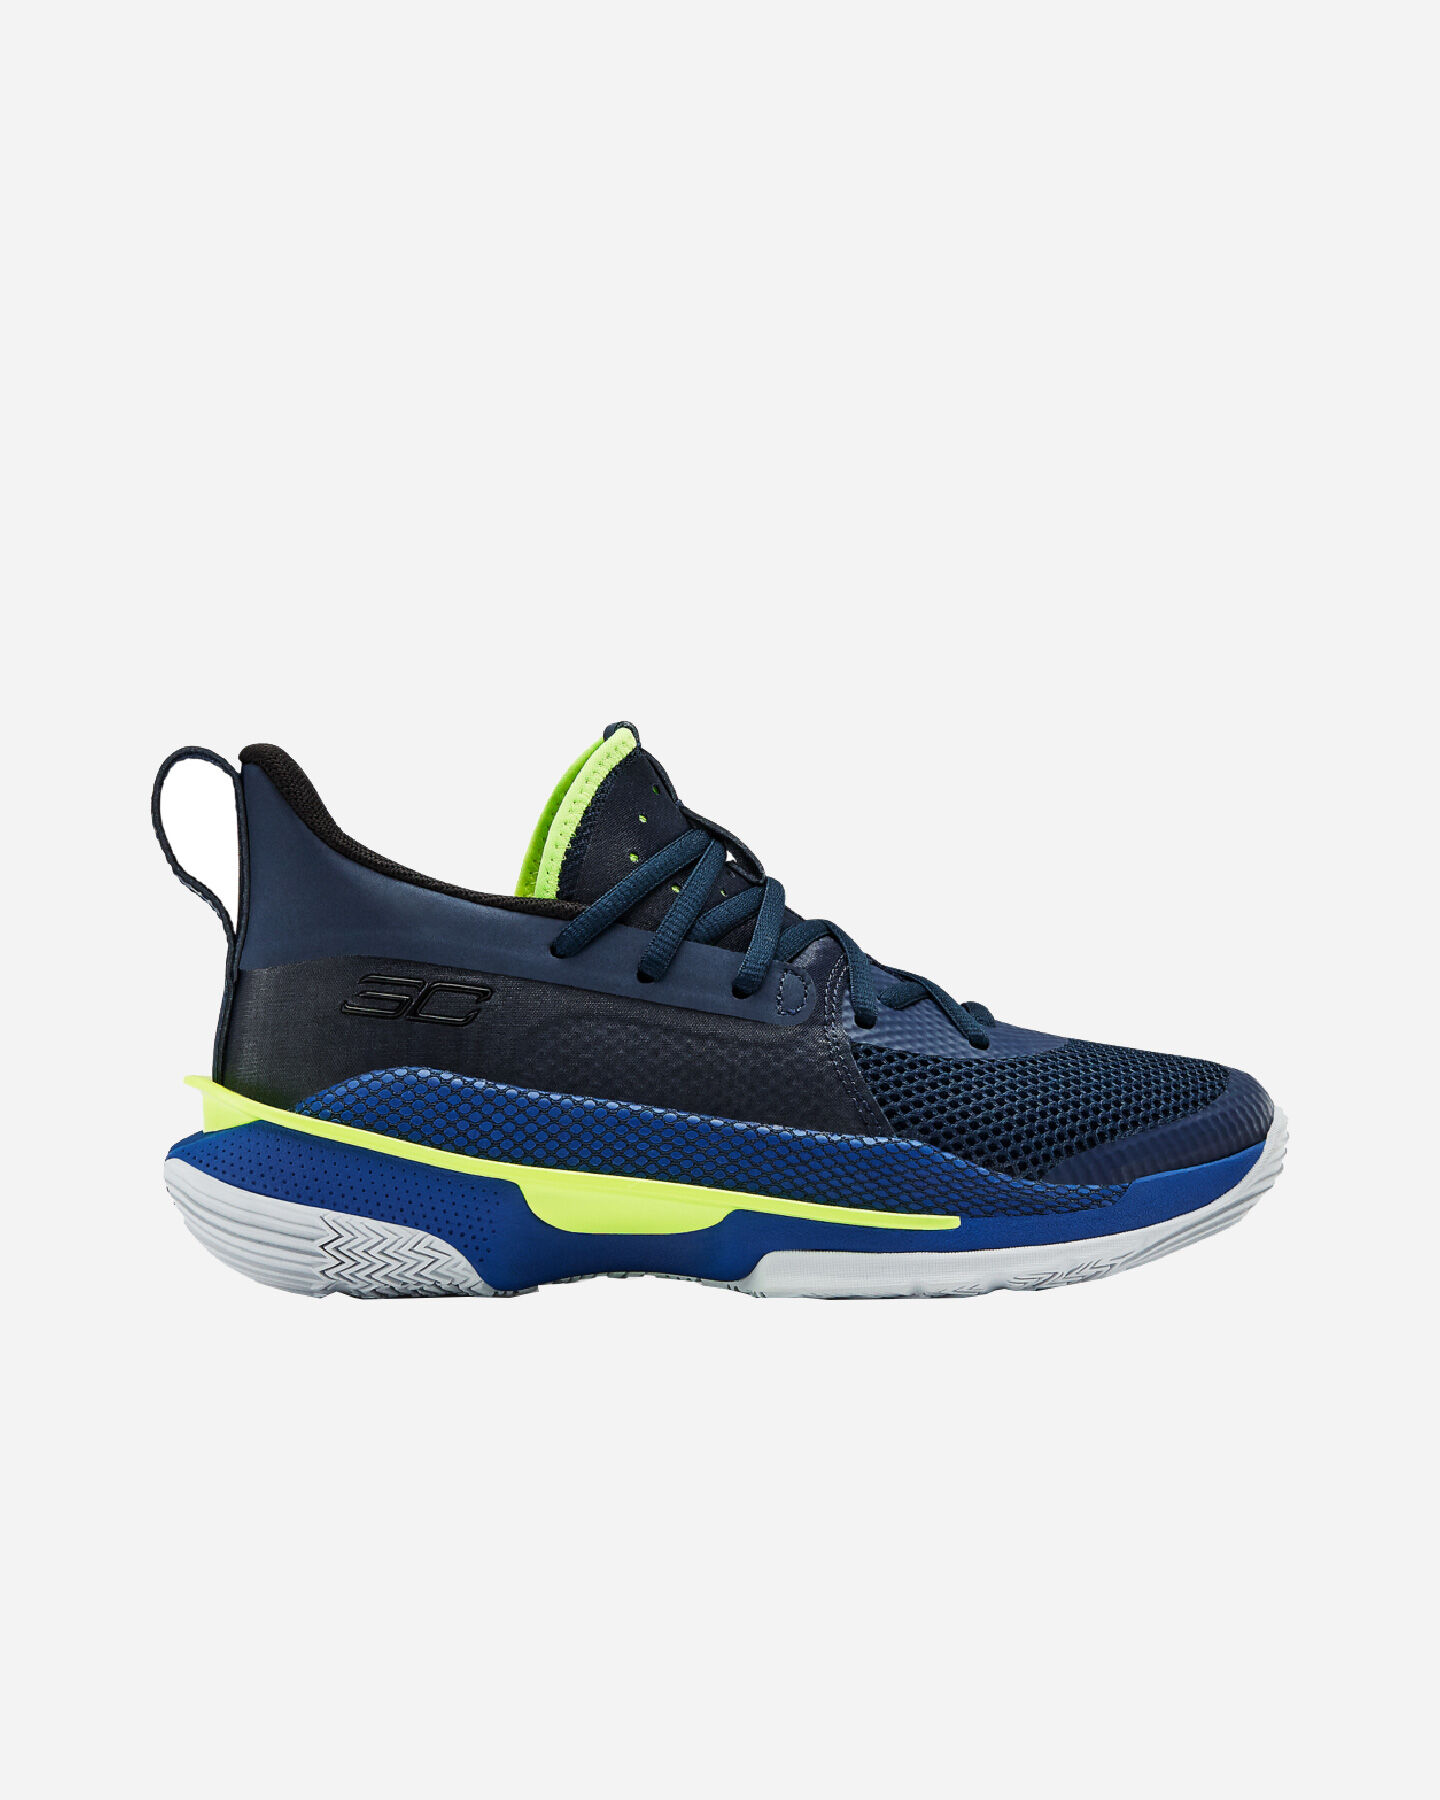  Scarpe basket UNDER ARMOUR CURRY 7 GS JR S5303464|0405|3,5 scatto 0